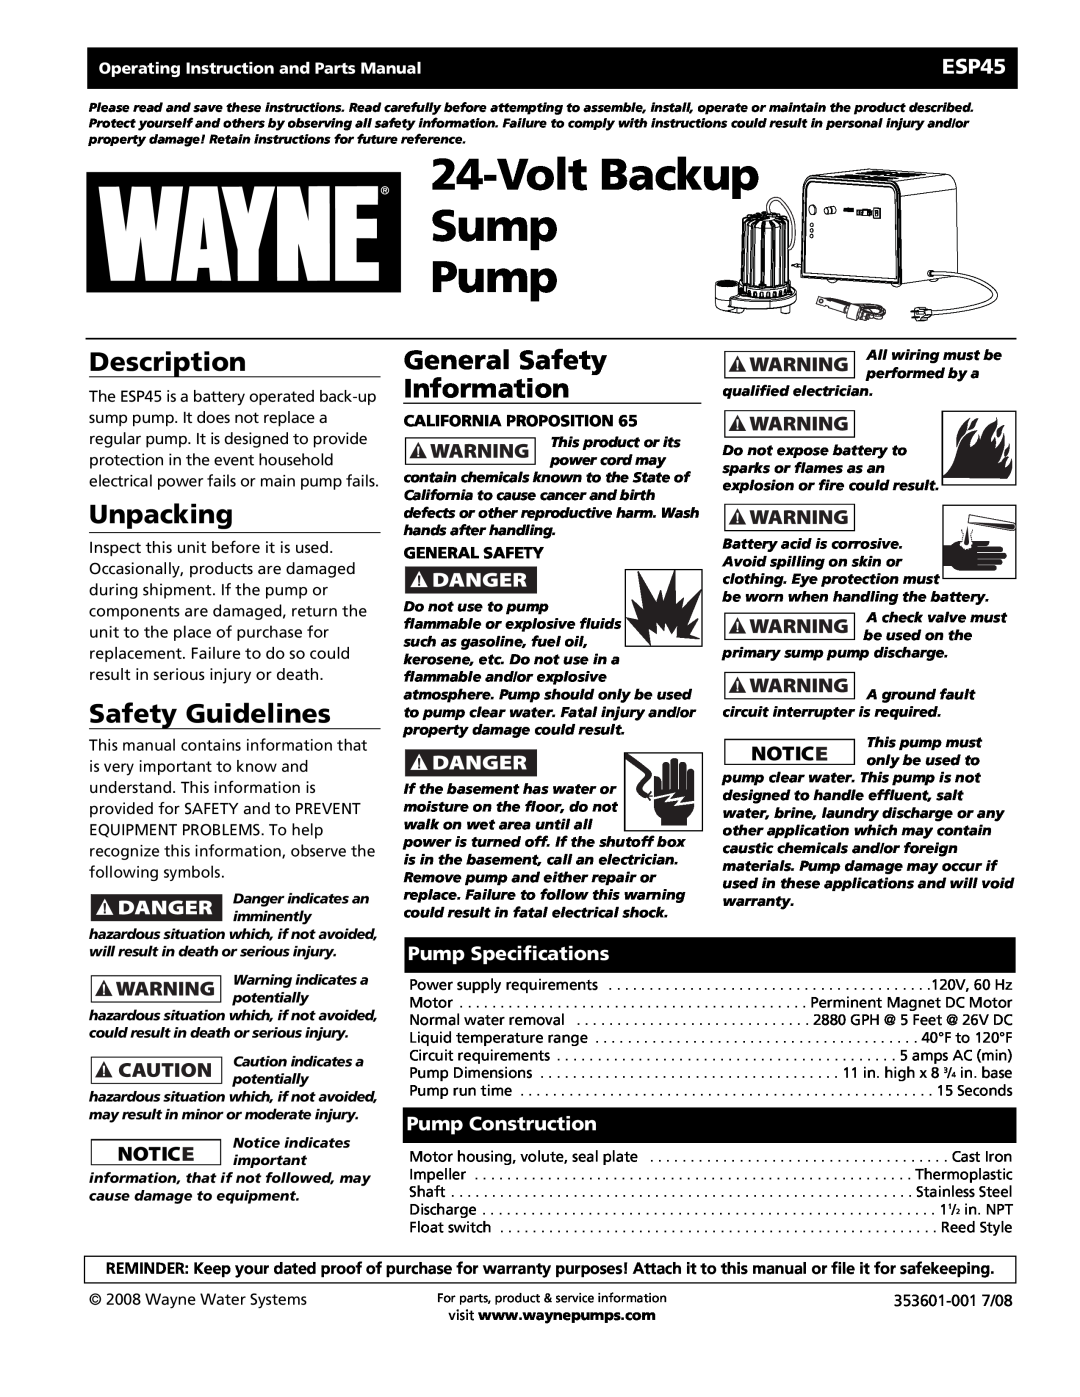 Wayne 353601-001 specifications Description, Unpacking, Safety Guidelines, General Safety Information, ESP45 